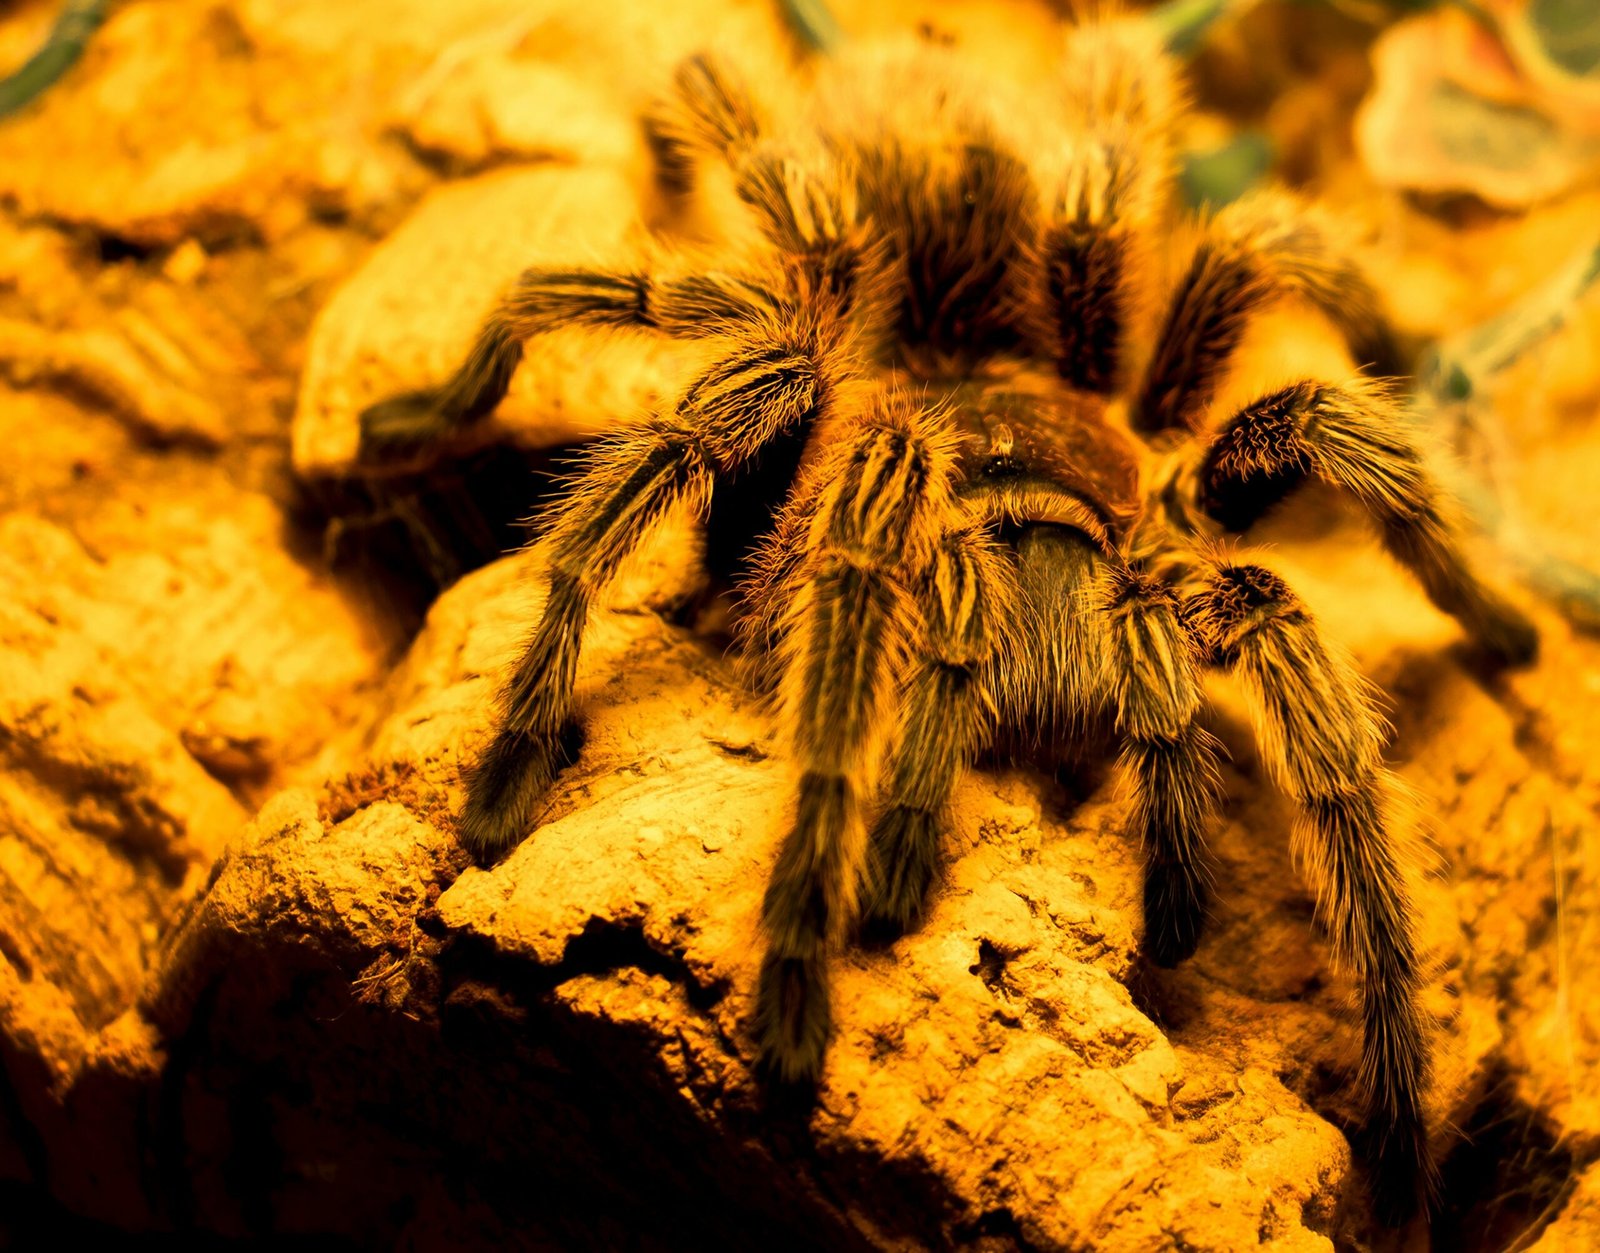 What Should I Do If My Tarantula Is Not Interested In Mating?